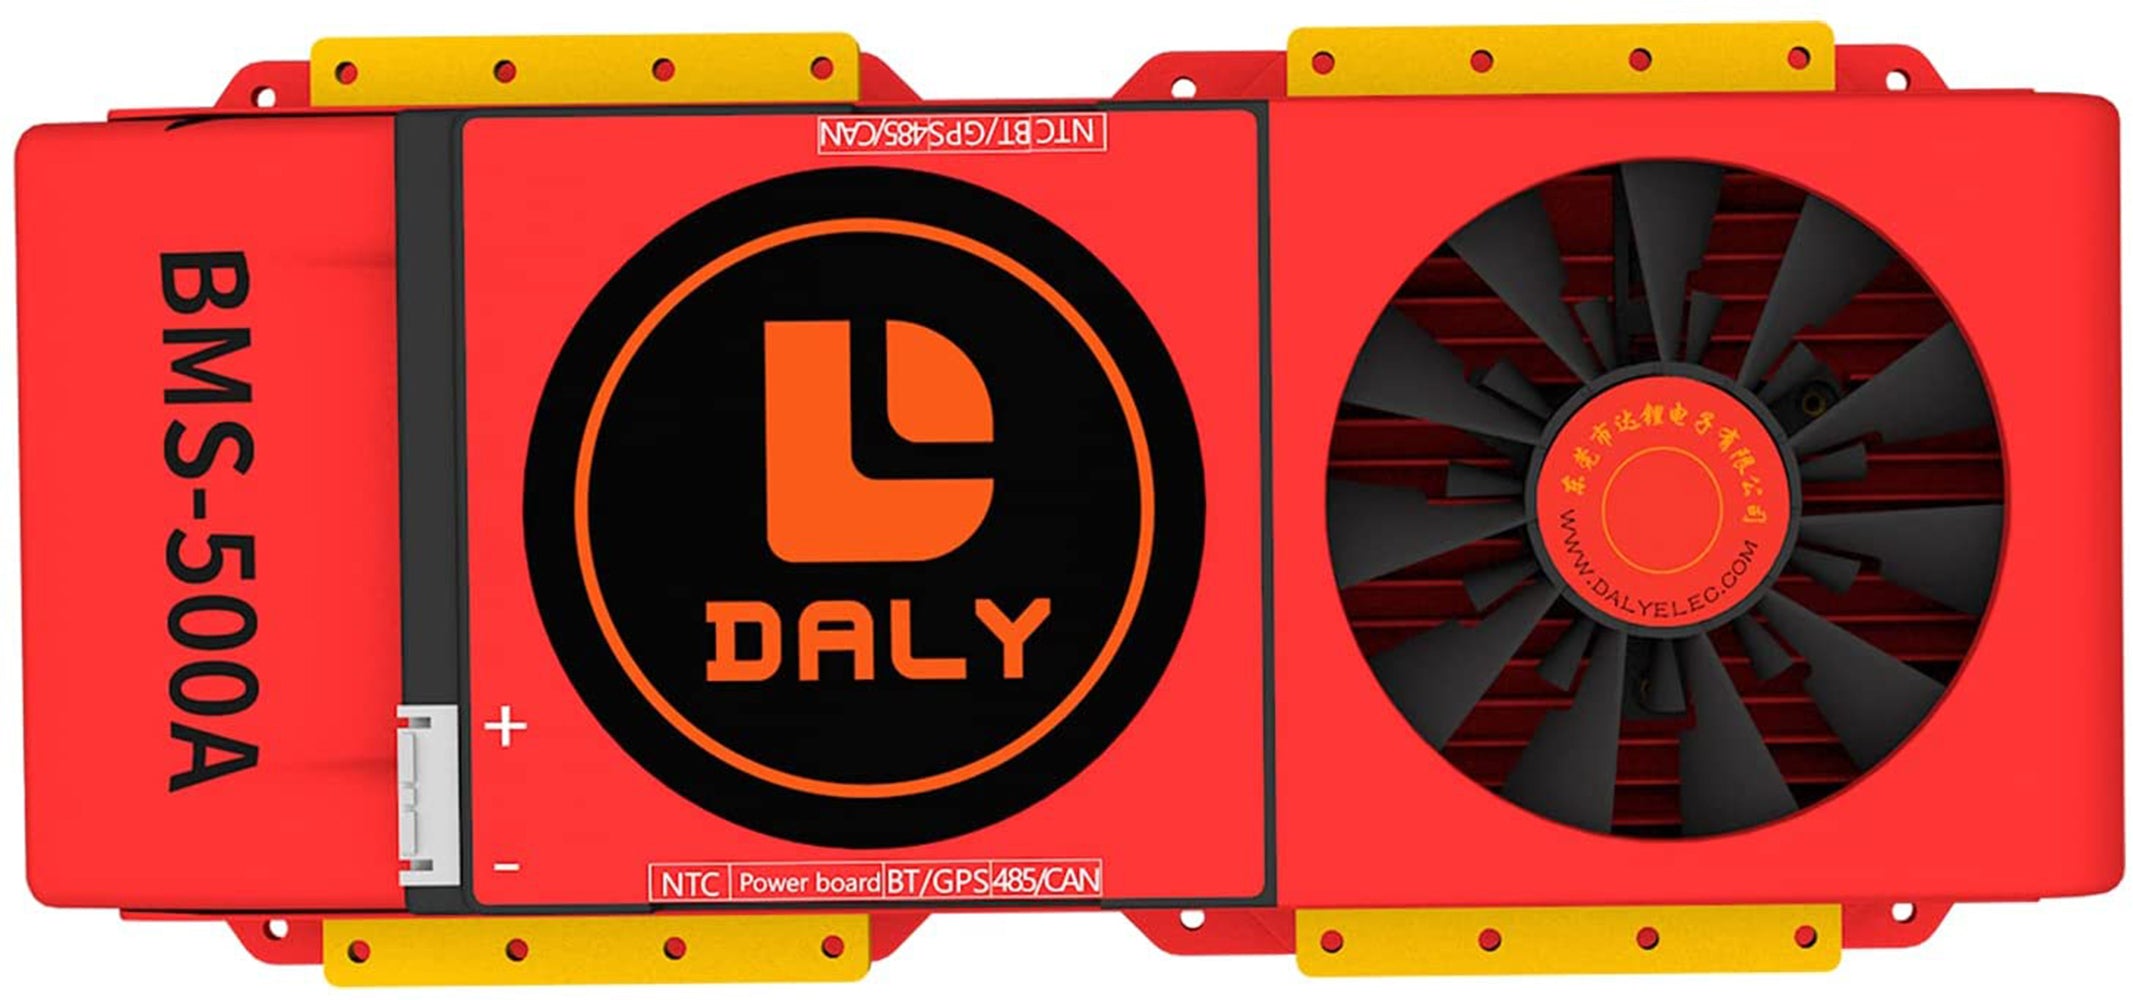 Daly smart bms Lifepo4 8S 24V 500A with Fan bluetooth 52 130 257